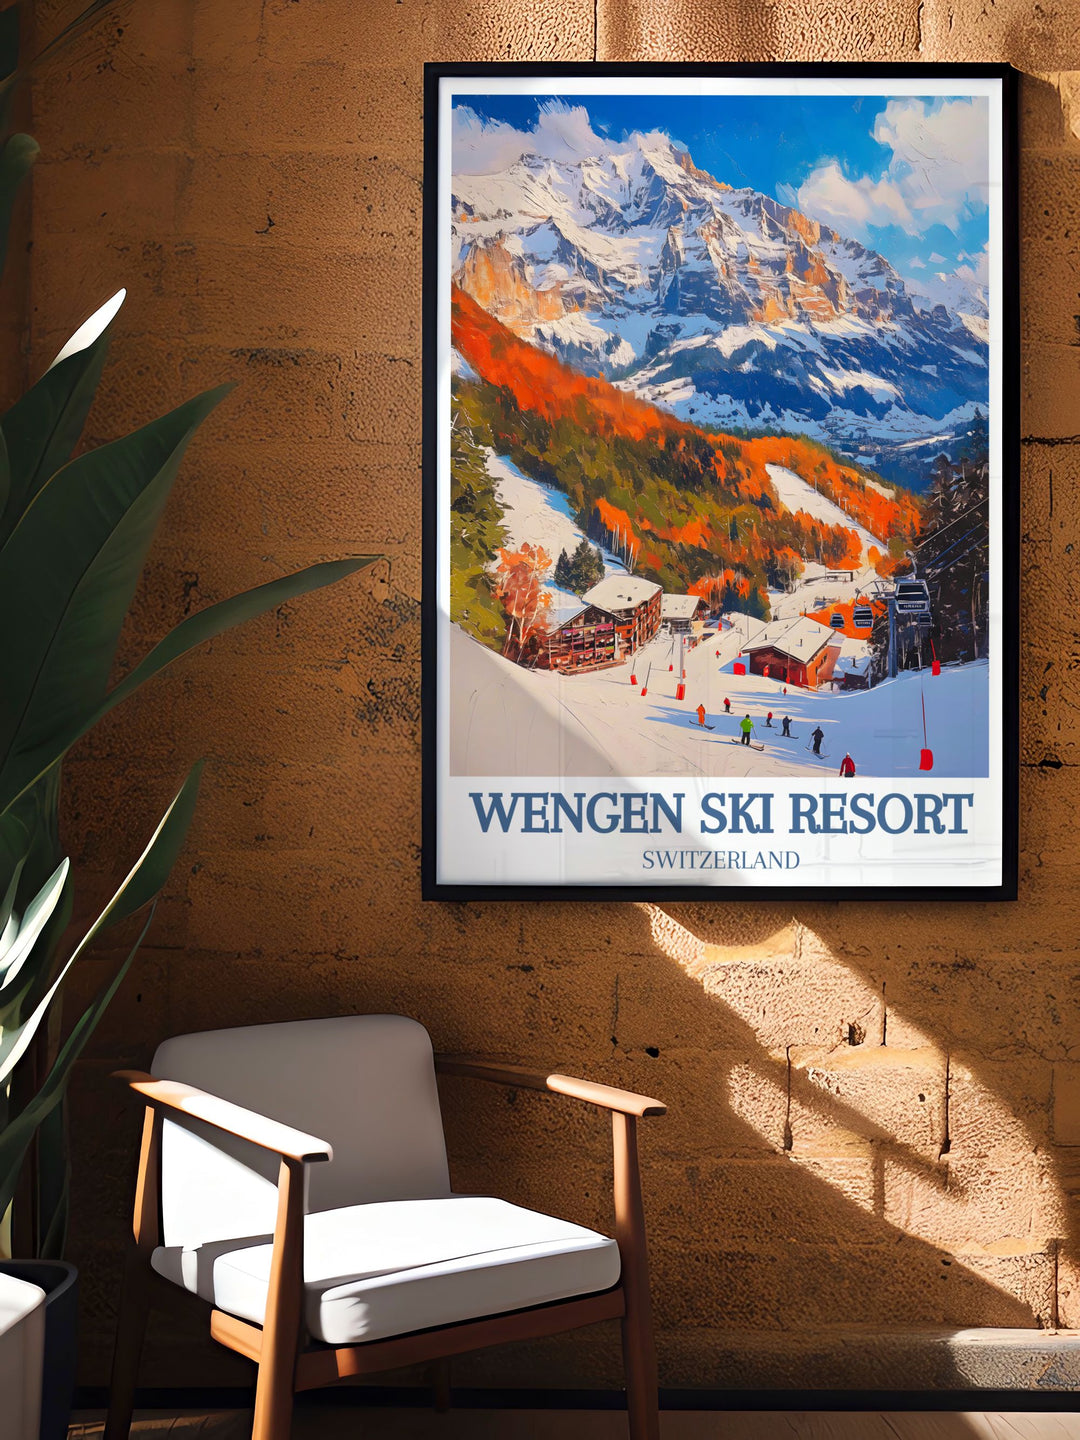 Celebrate the charm of Switzerland with this vintage poster of Wengen Ski Resort. Featuring its iconic chalets and pristine snow, this artwork evokes the timeless beauty of the Swiss Alps, ideal for classic travel art enthusiasts.